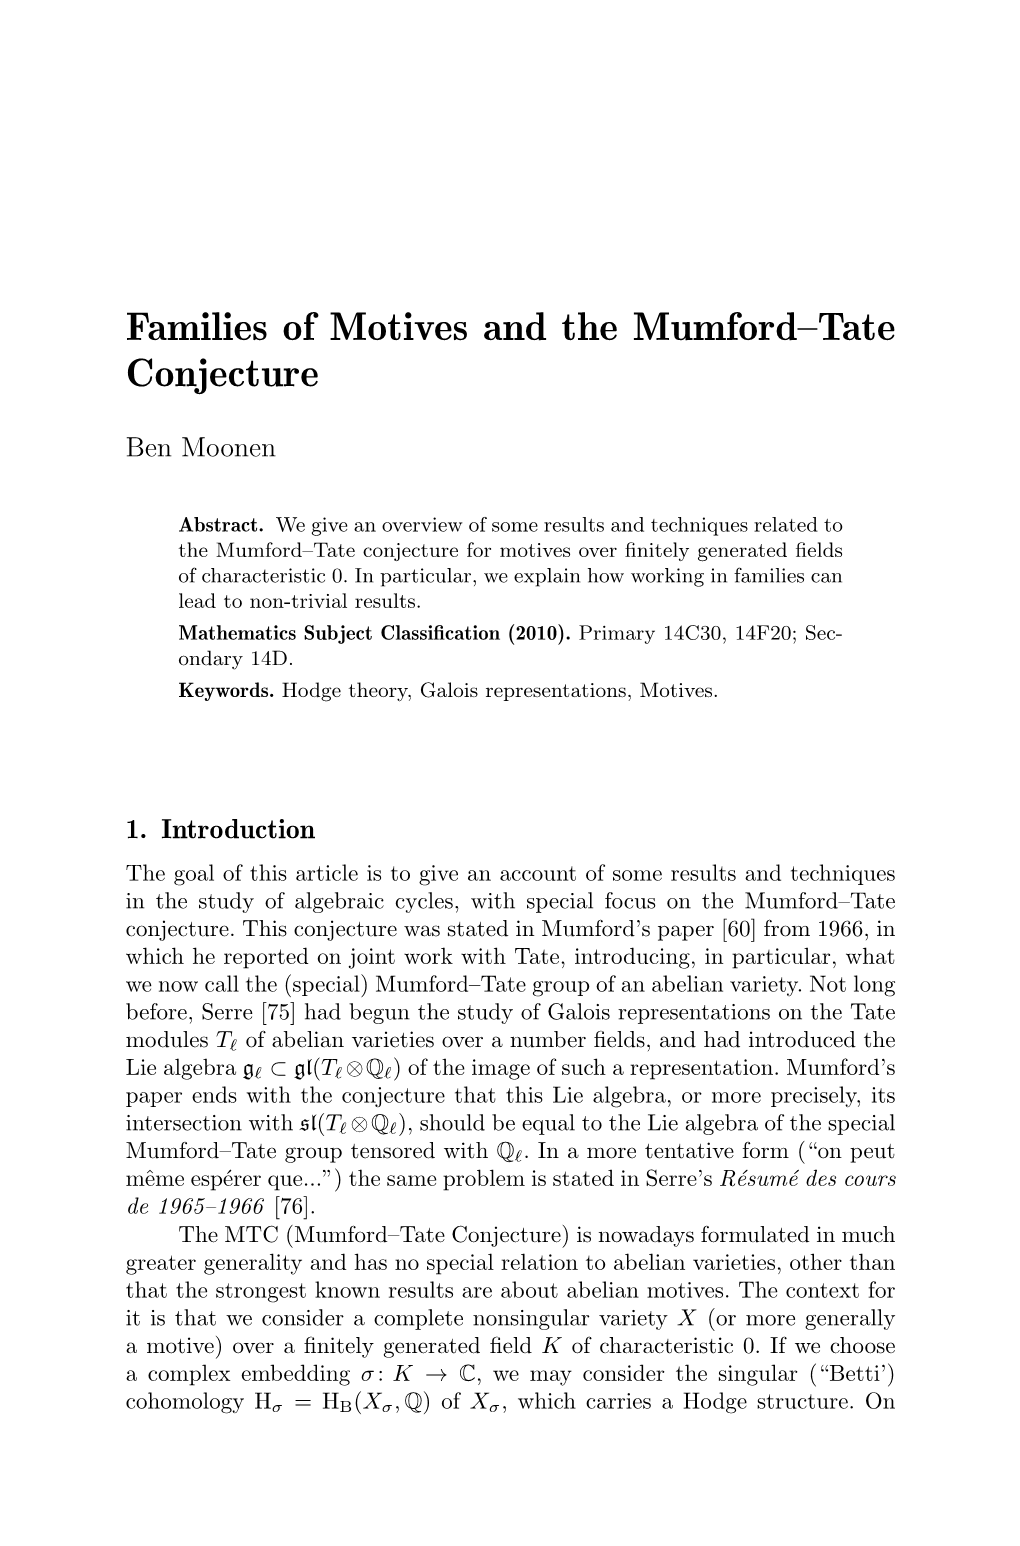 Families of Motives and the Mumford–Tate Conjecture